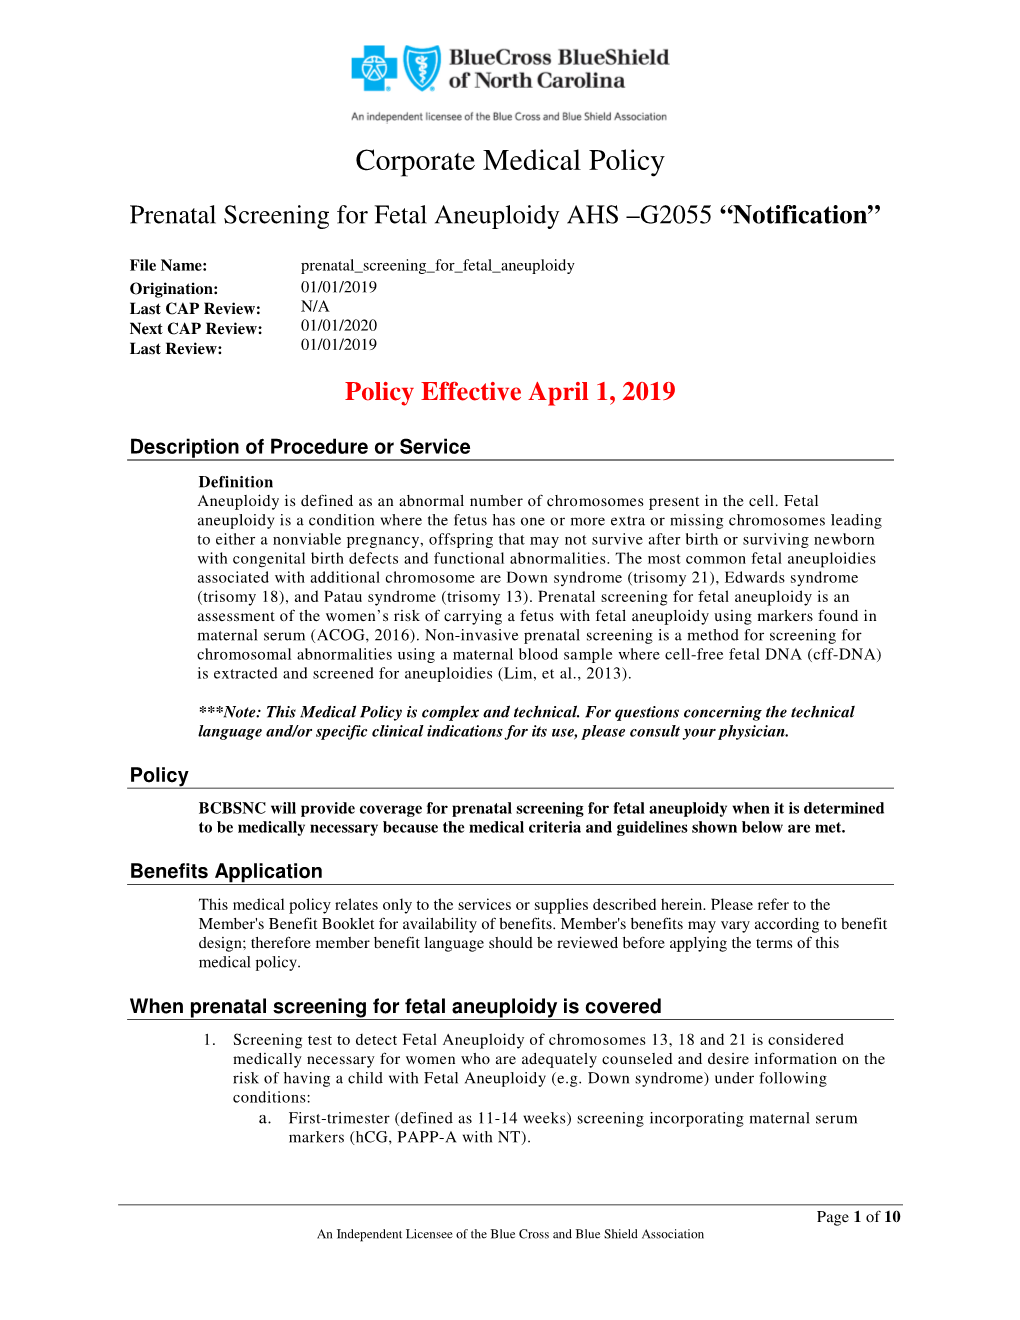 Corporate Medical Policy Prenatal Screening for Fetal Aneuploidy AHS –G2055 “Notification”